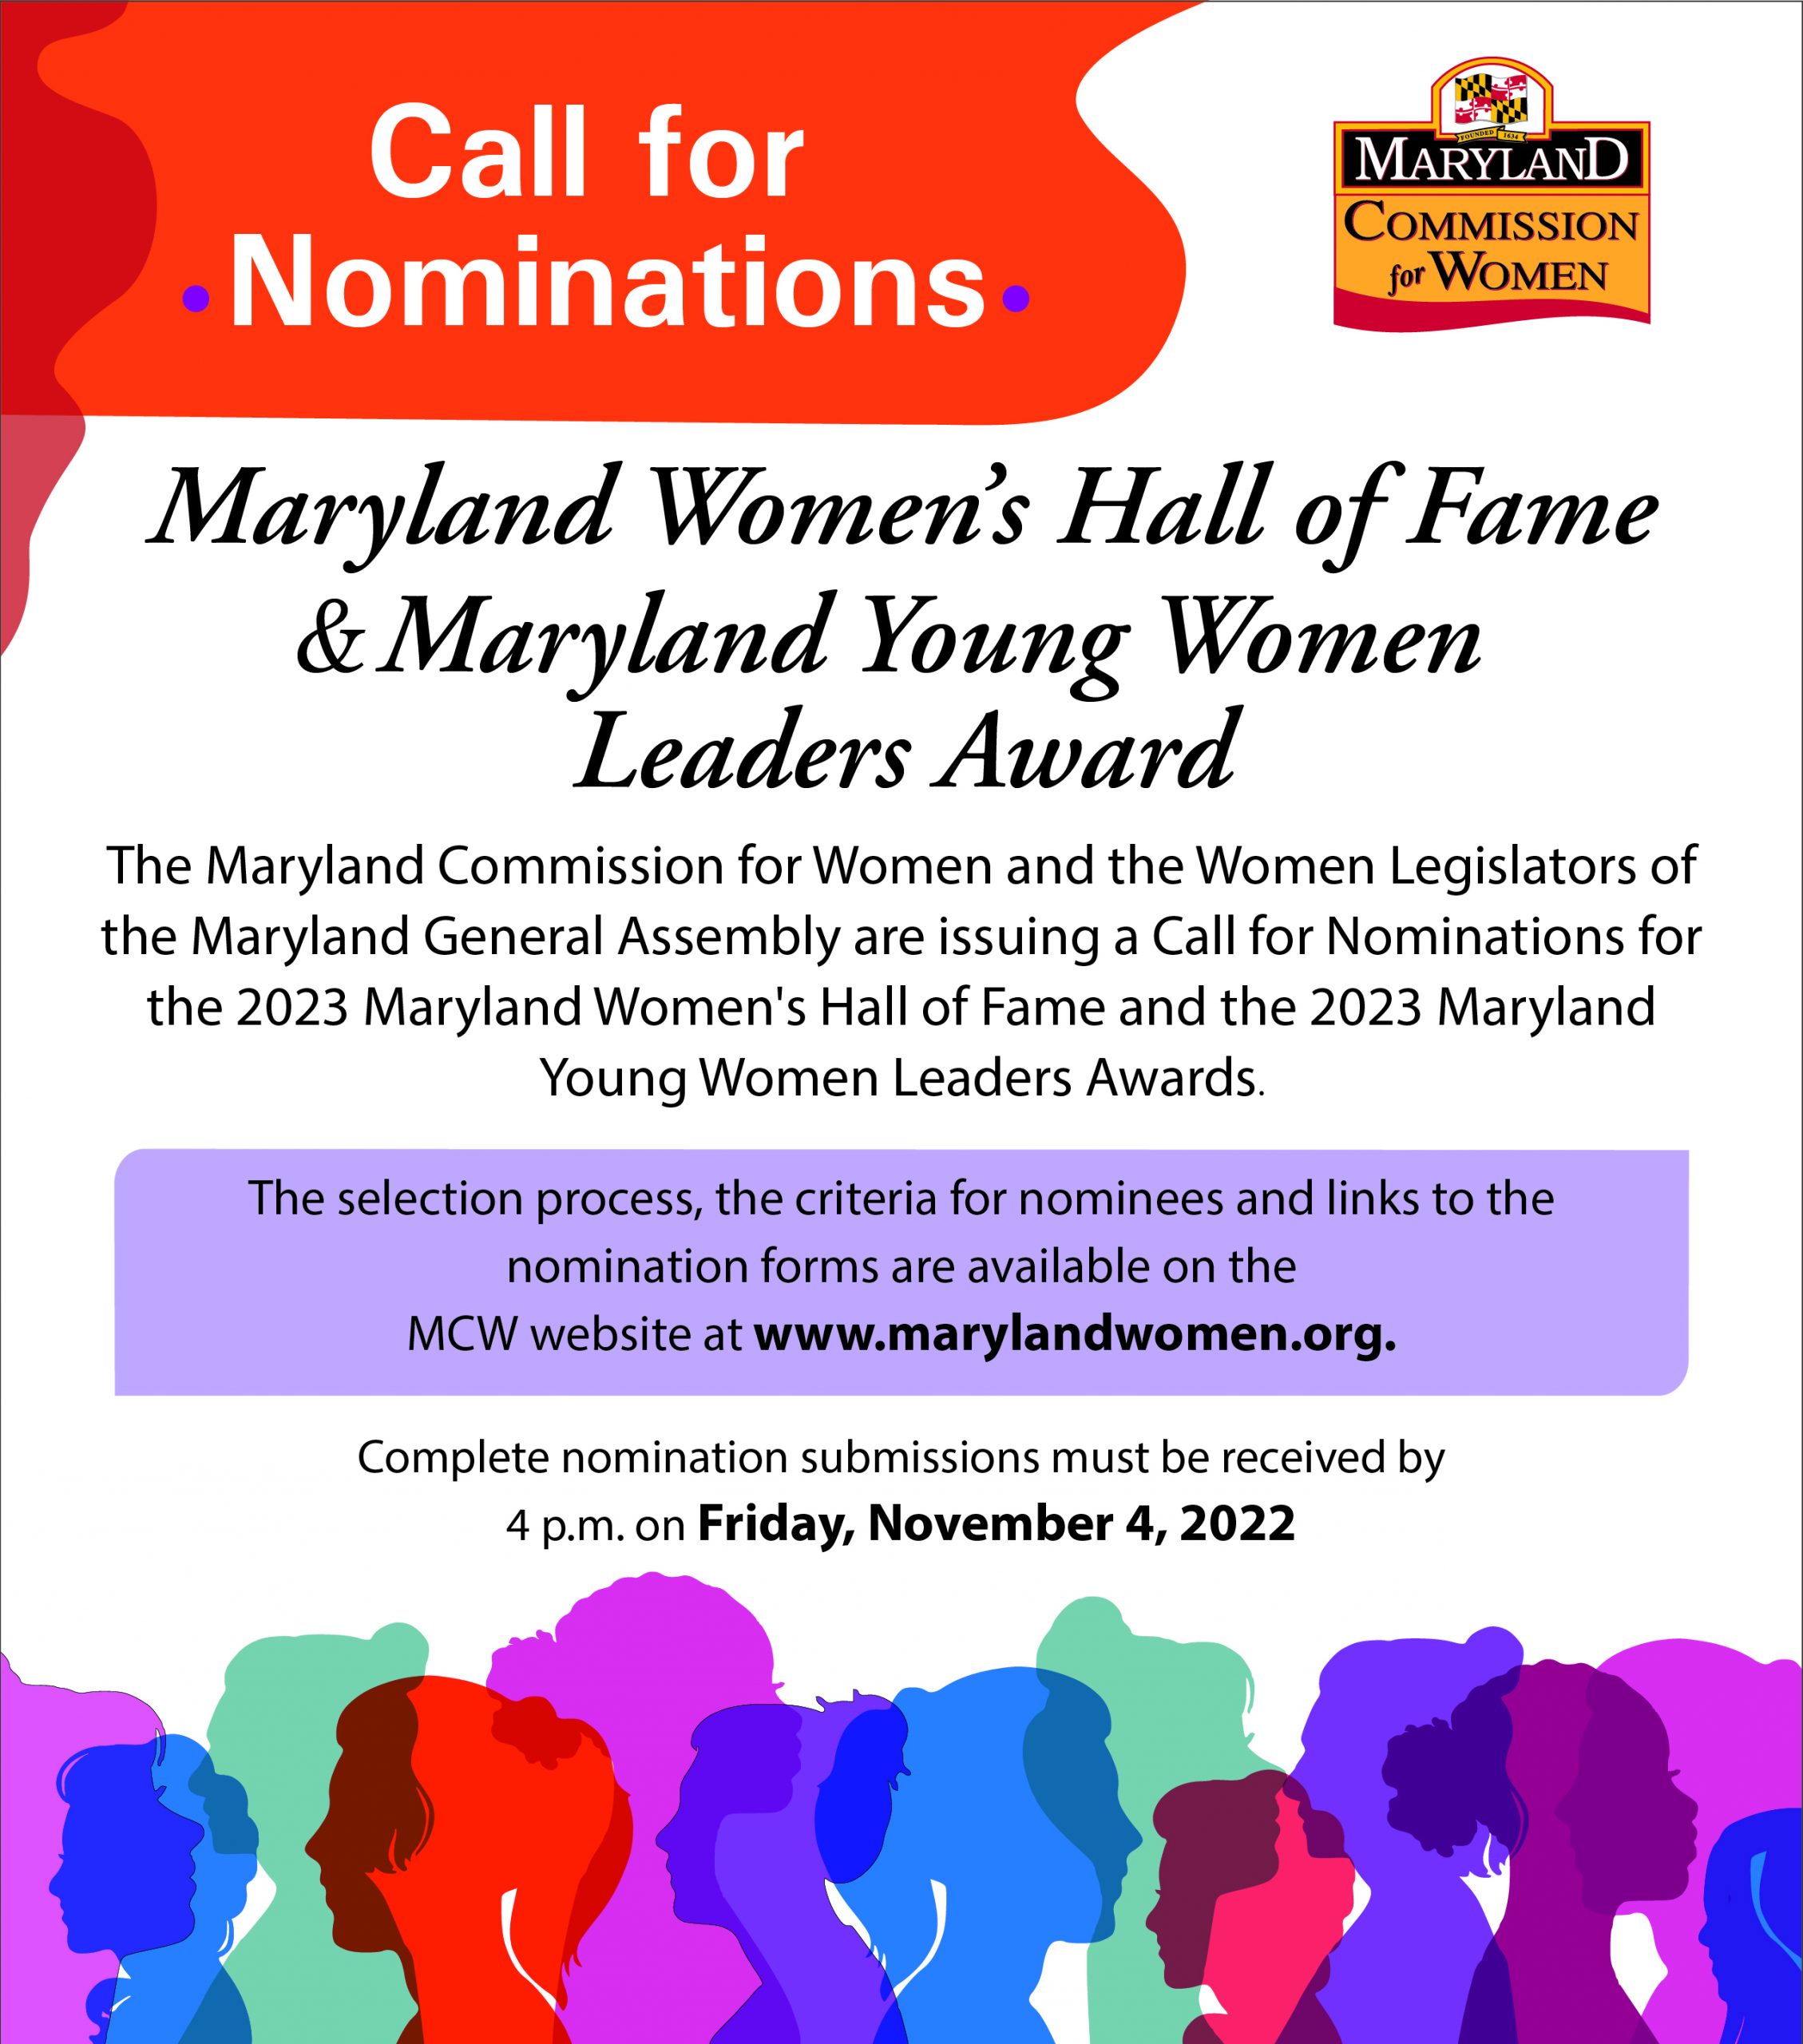 Nominations for Maryland Women's Hall of Fame & Maryland Young Women Leaders Awards due by Friday, Nov. 4, 2022 at 4 PM